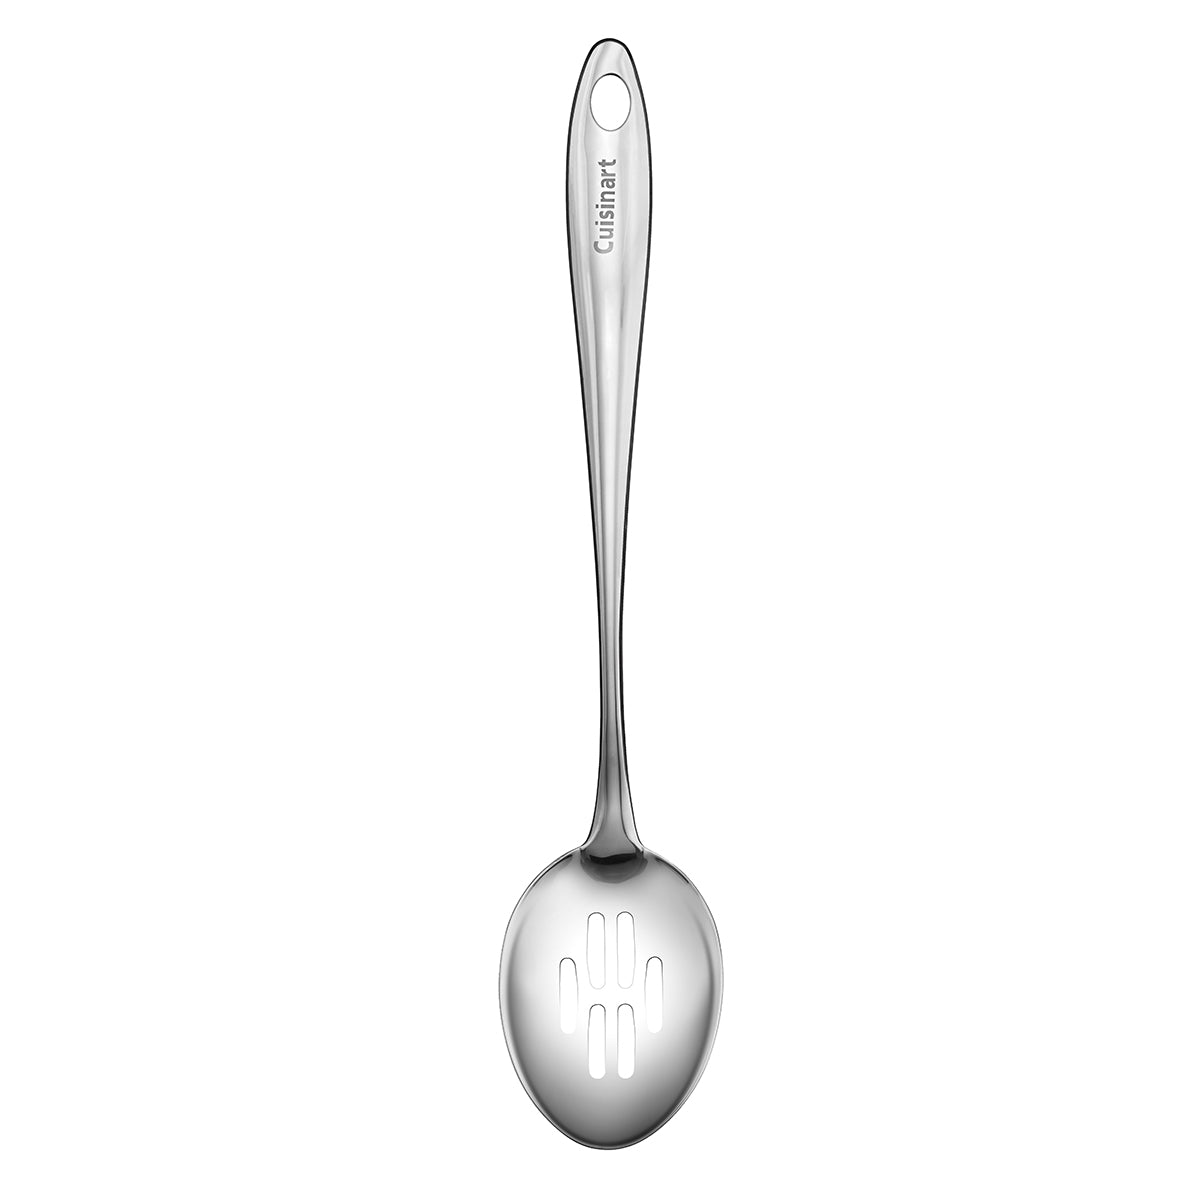 Cuisinart Stainless Steel Measuring Spoon Set in the Kitchen Tools